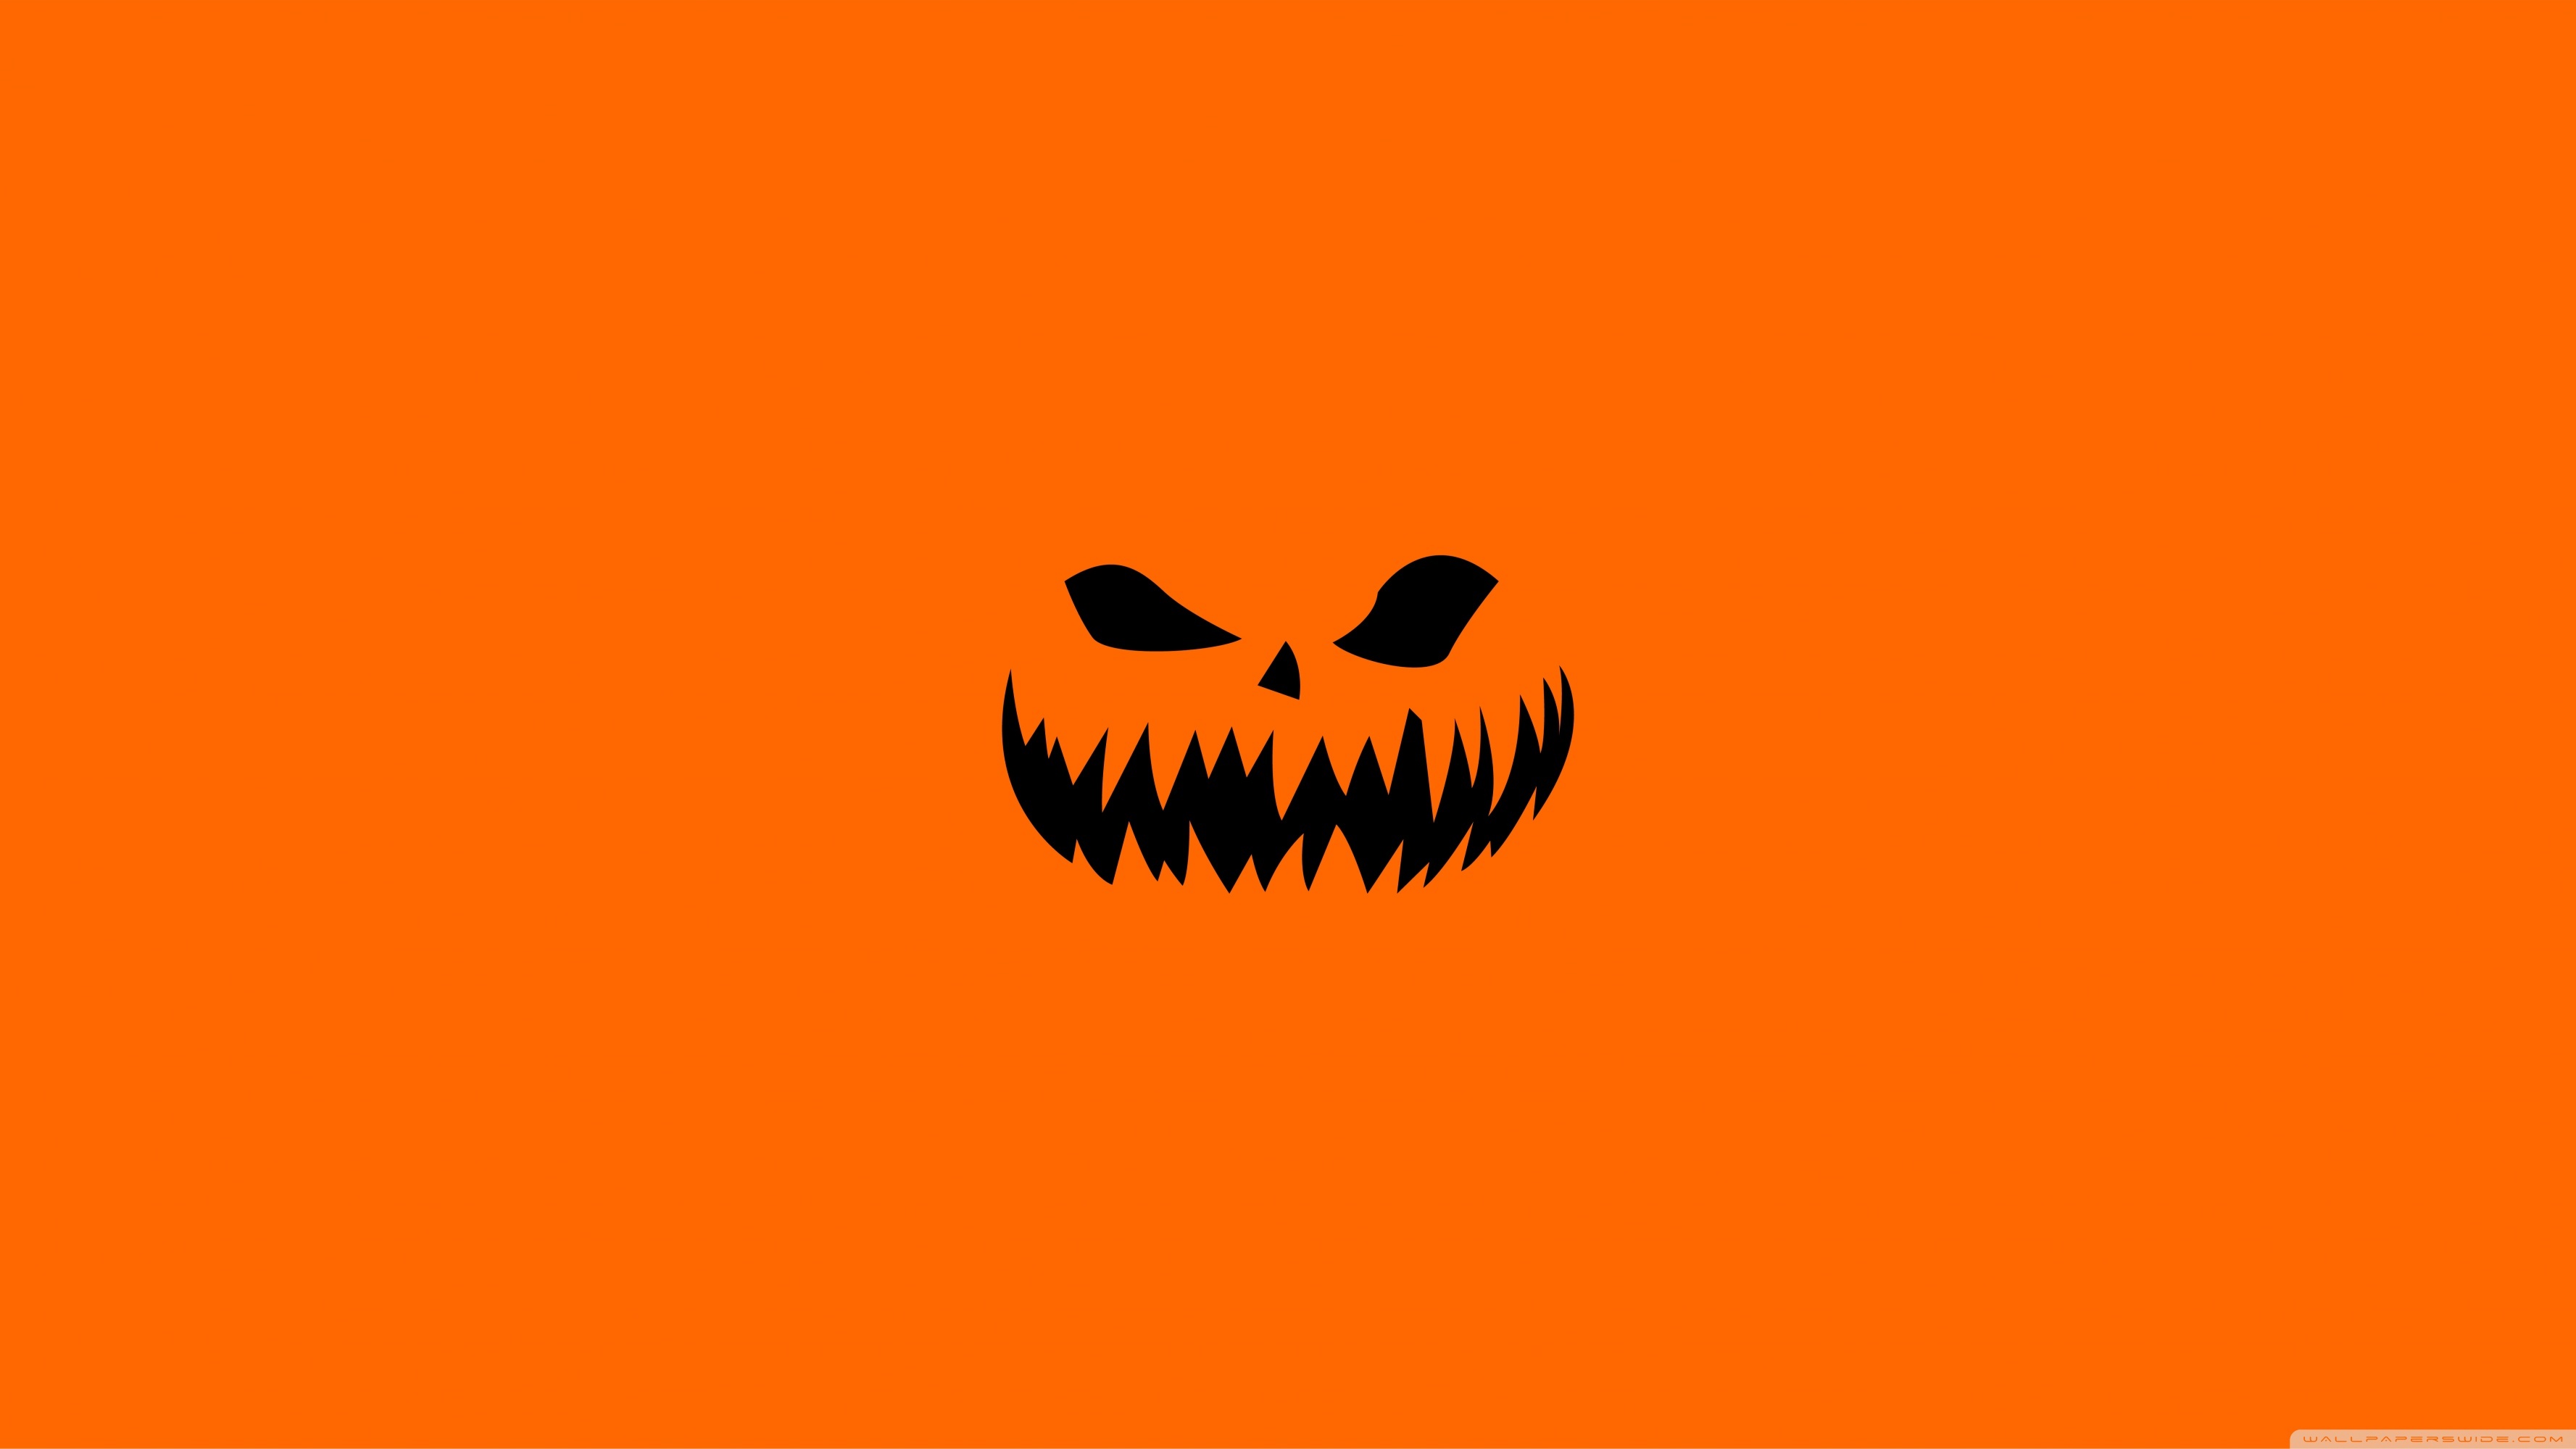 Scary Halloween Face On Orange Background Wallpaper Holidays